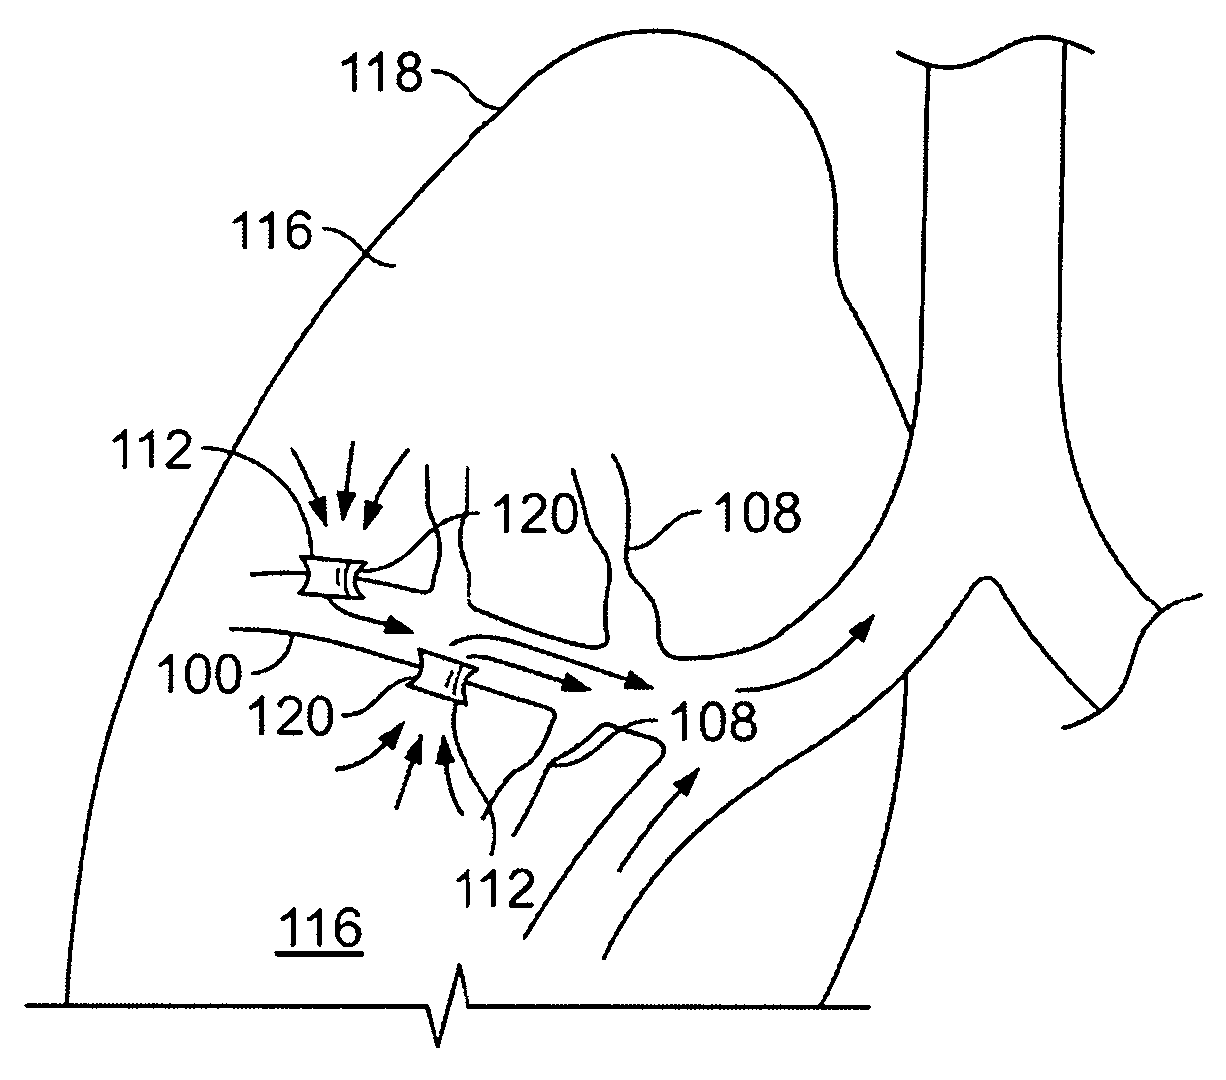 Devices for creating passages and sensing blood vessels